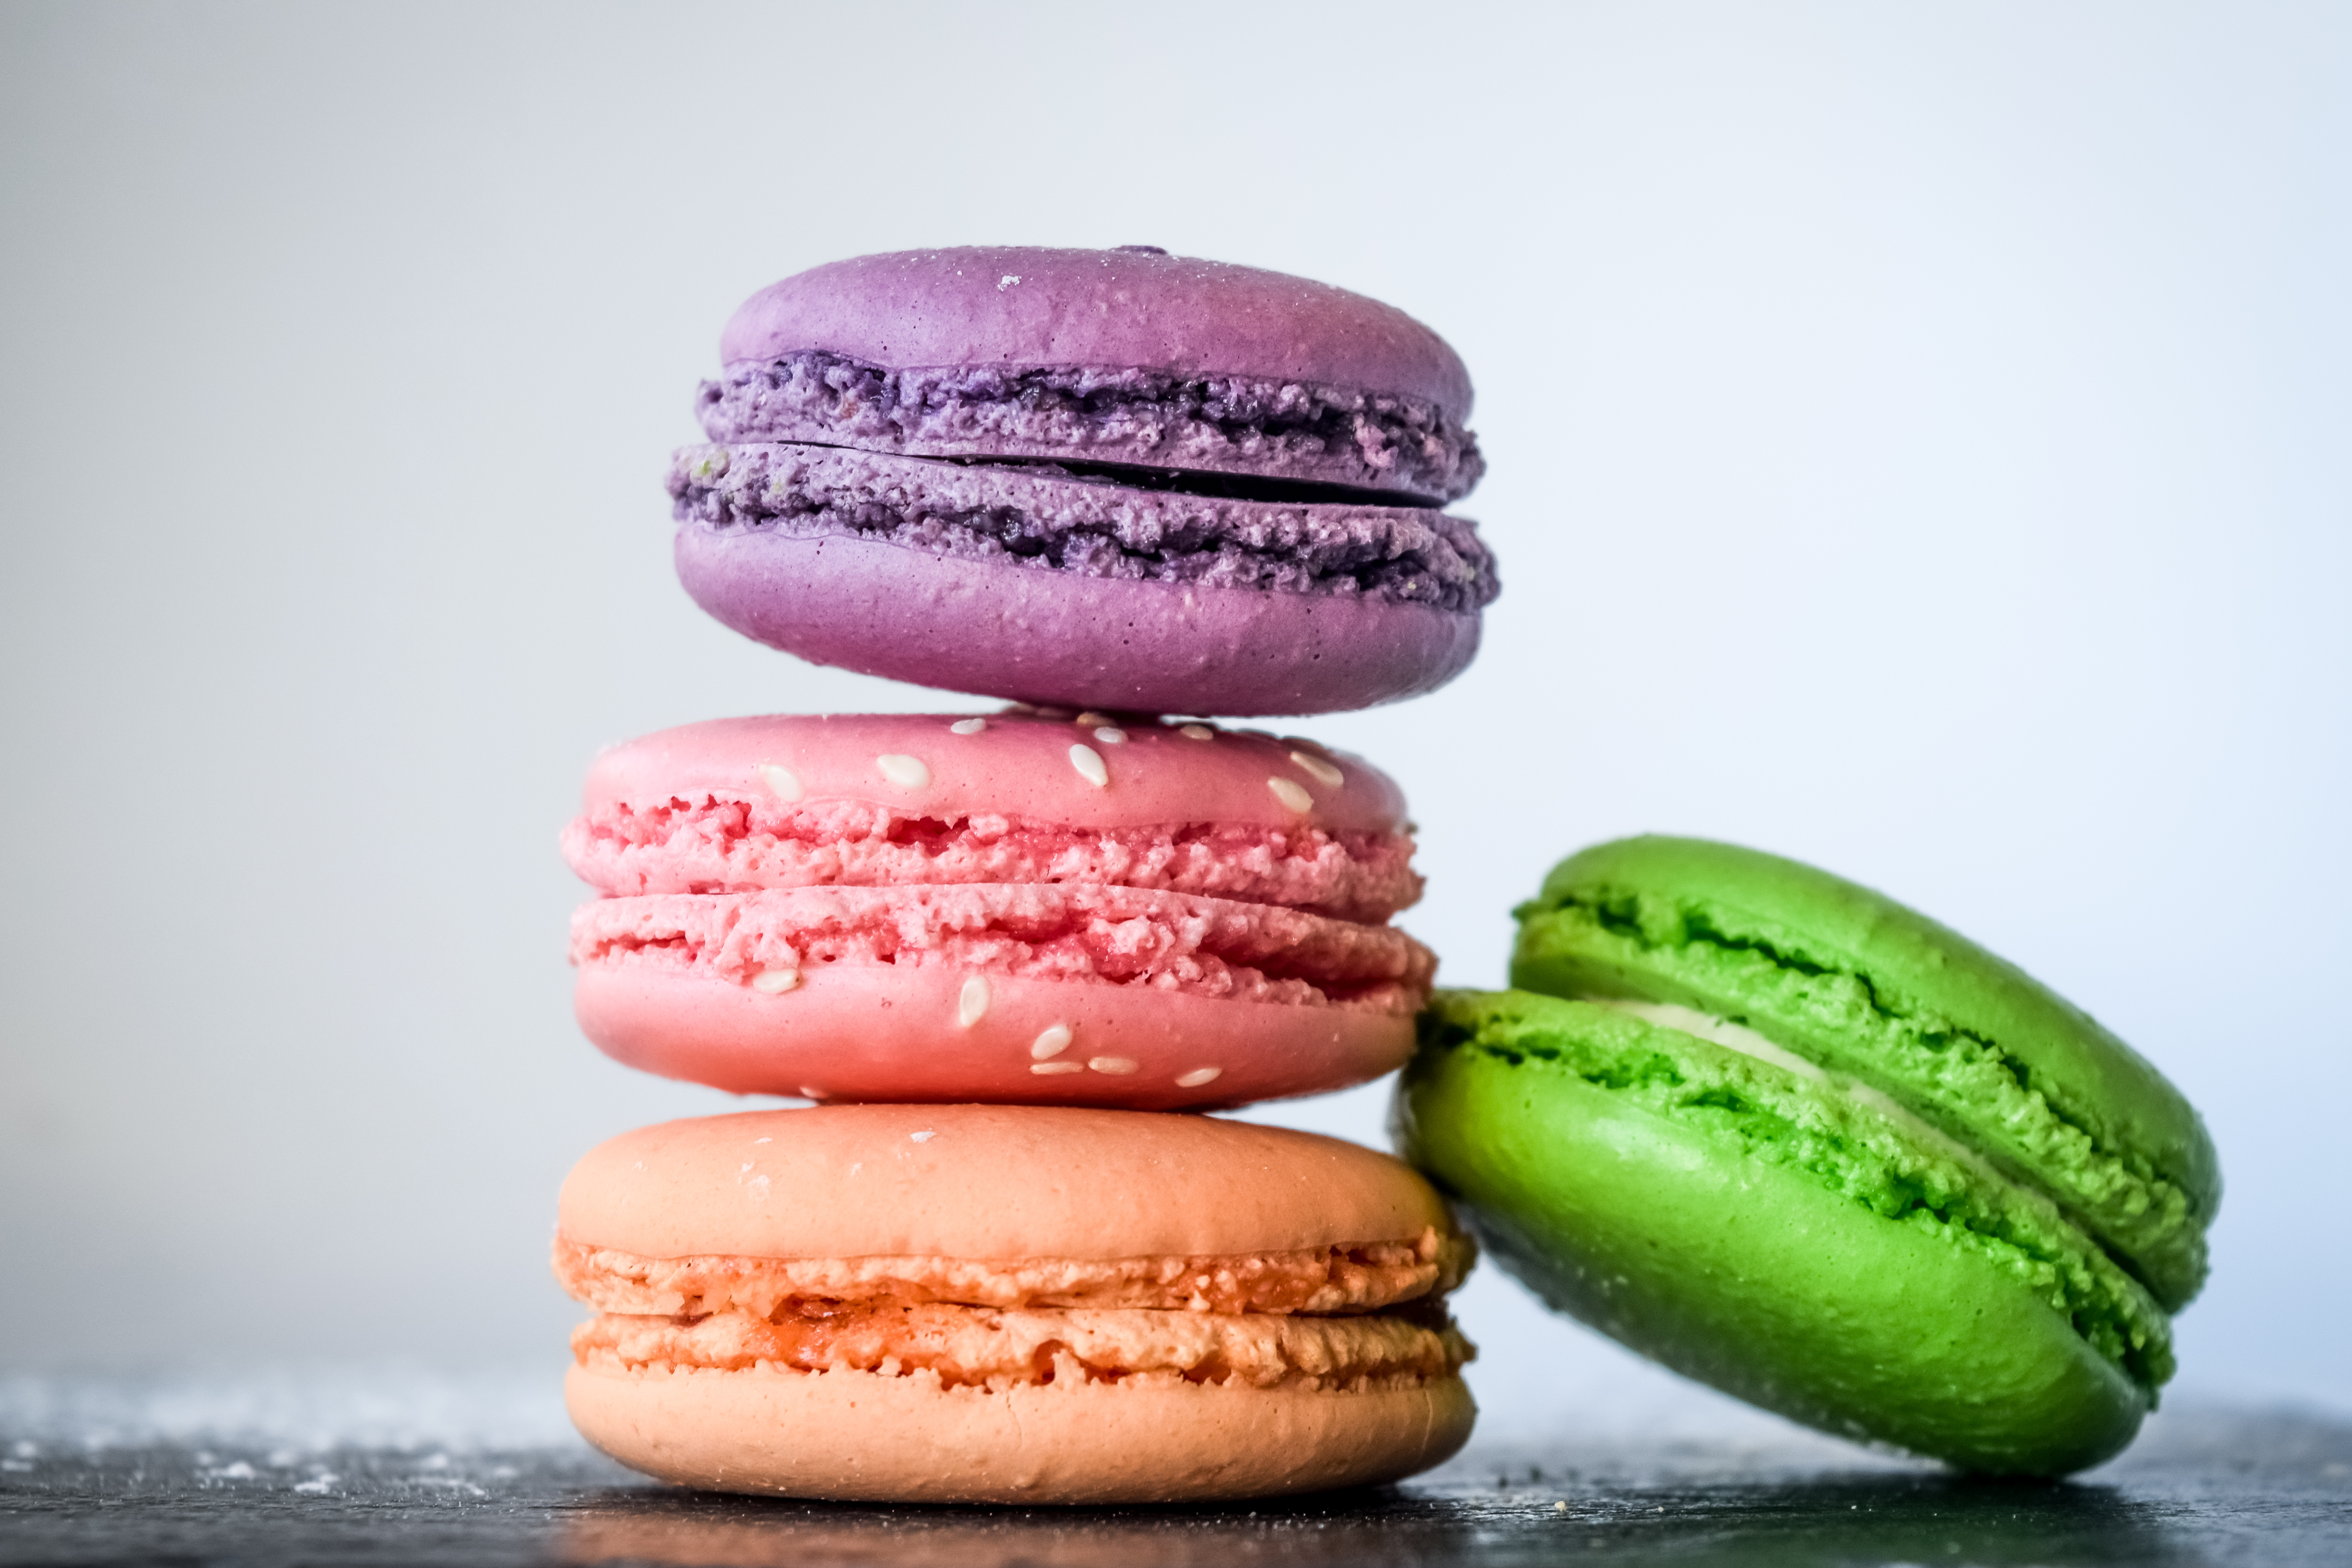 makaroons, food, multicolored, bakery products, baking, macaroons, macaroon